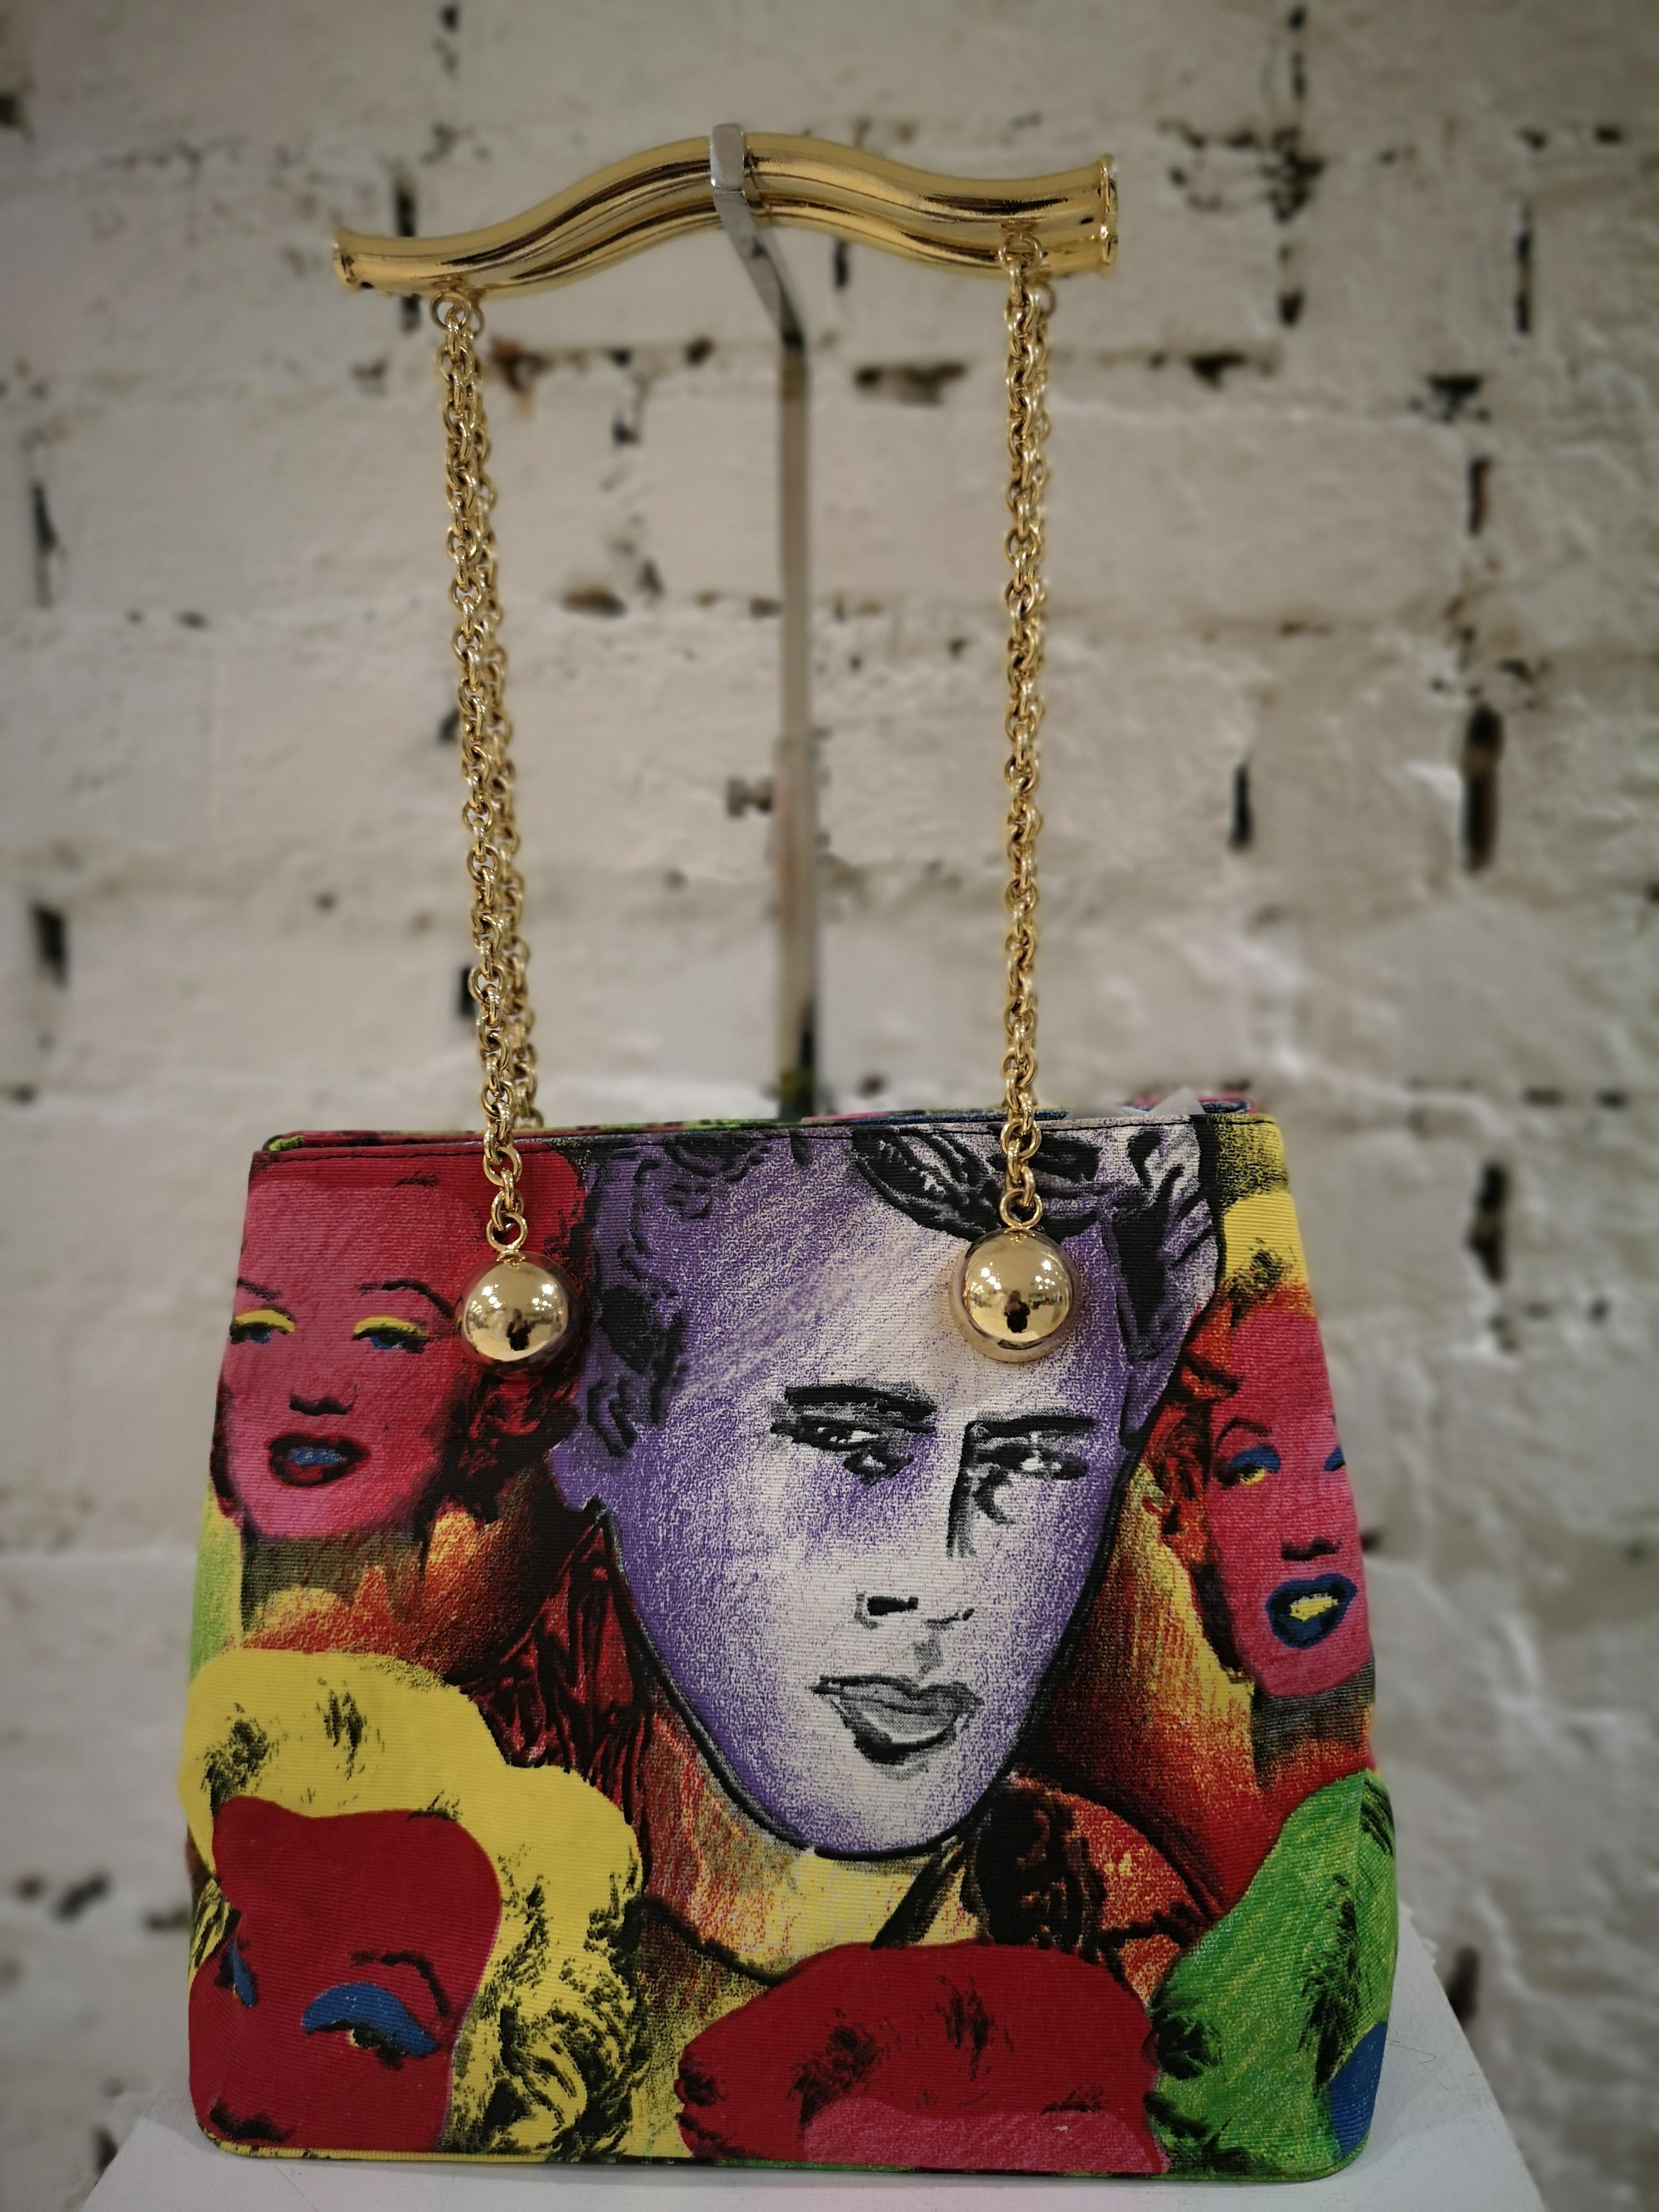 1991 Versace Marilyn Monroe James Dean Warhol bag
unique and rare bag from Gianni Versace 1991 Warhol Collection
this unique piece is made from painted canvas, it rapresents Versace's debute to Warhol
Gold tone hardware and gold tone handle
this